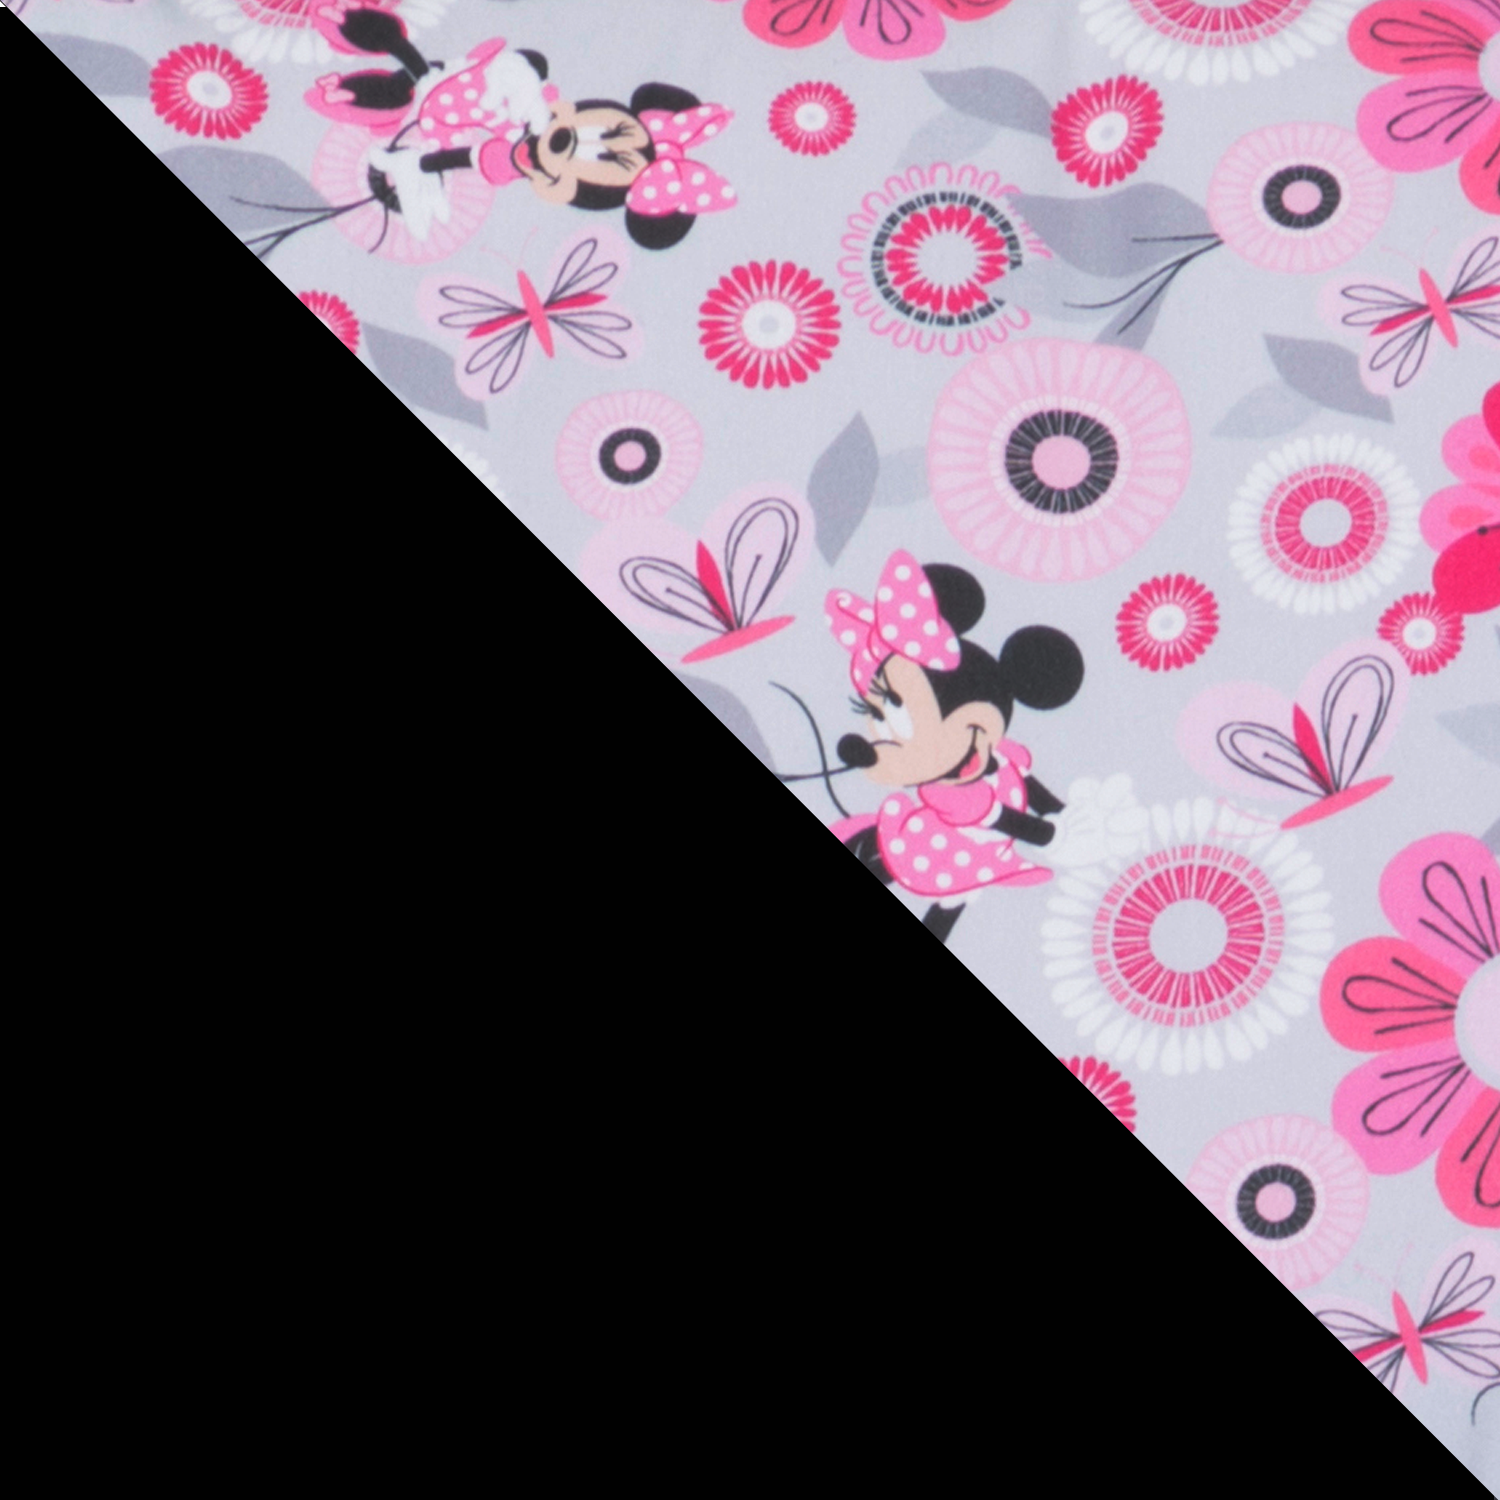 Disney Baby Scenera NEXT Luxe Convertible Car Seat, Minnie Meadow - image 5 of 15